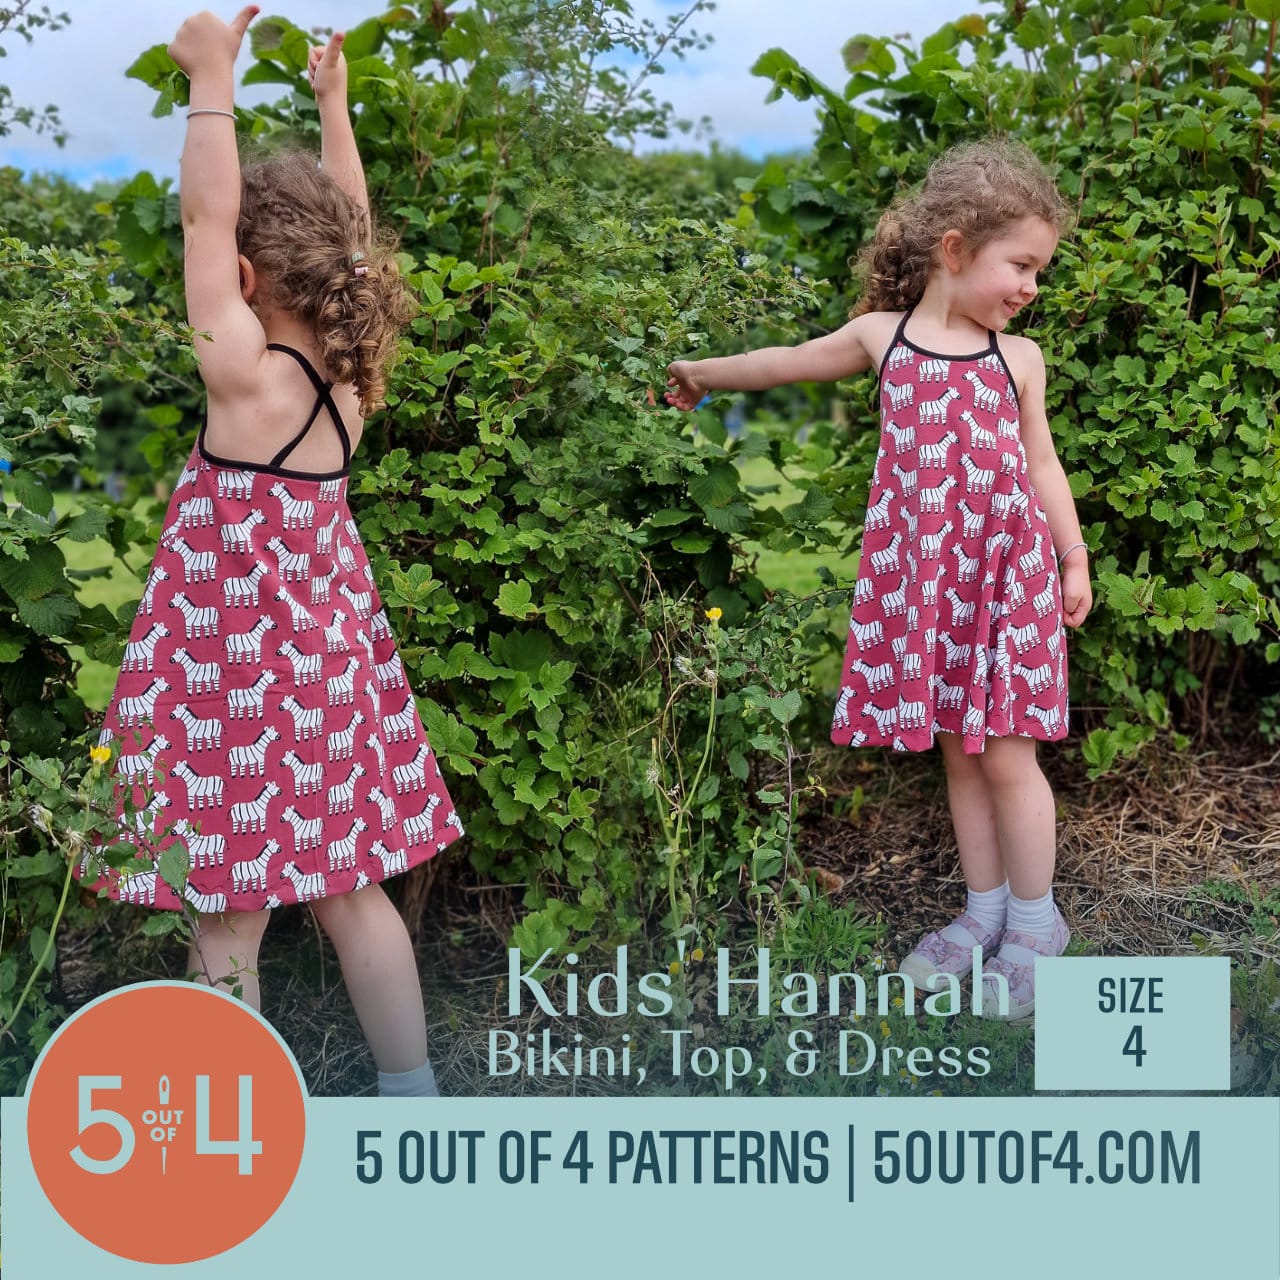 Hannah Racer Back Swimsuit and Leotard Sewing Pattern in Girls